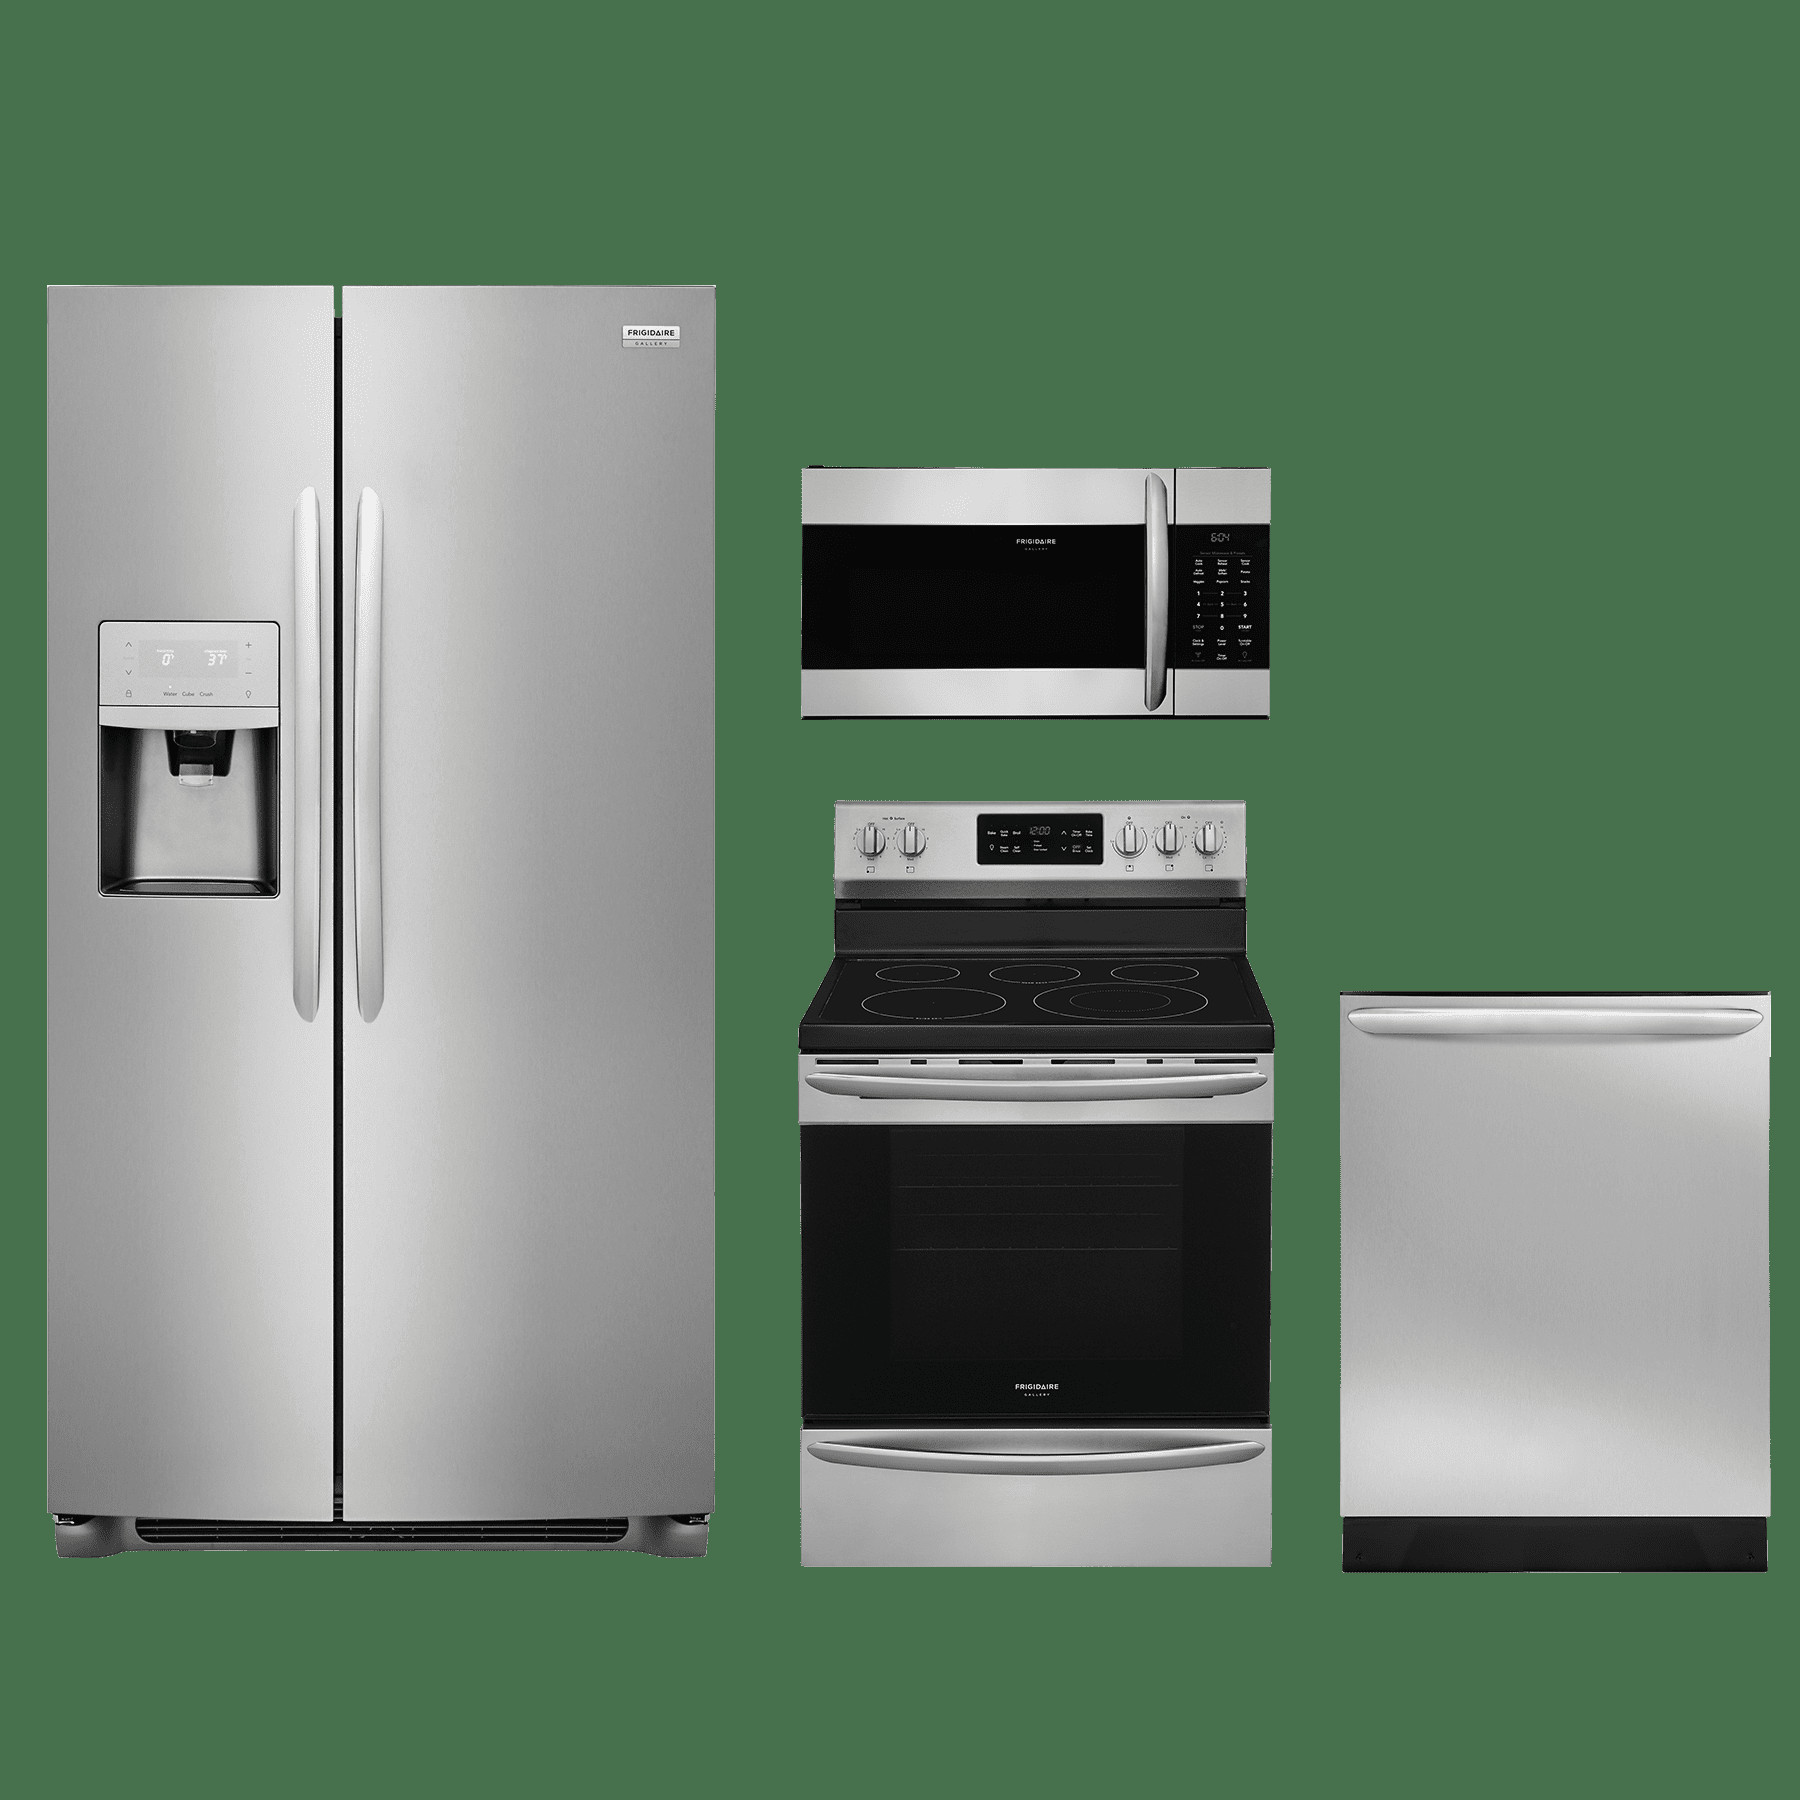 Outdoor Kitchen Appliances Packages
 Kitchen Appliance Packages frigidaire gallery 4 piece